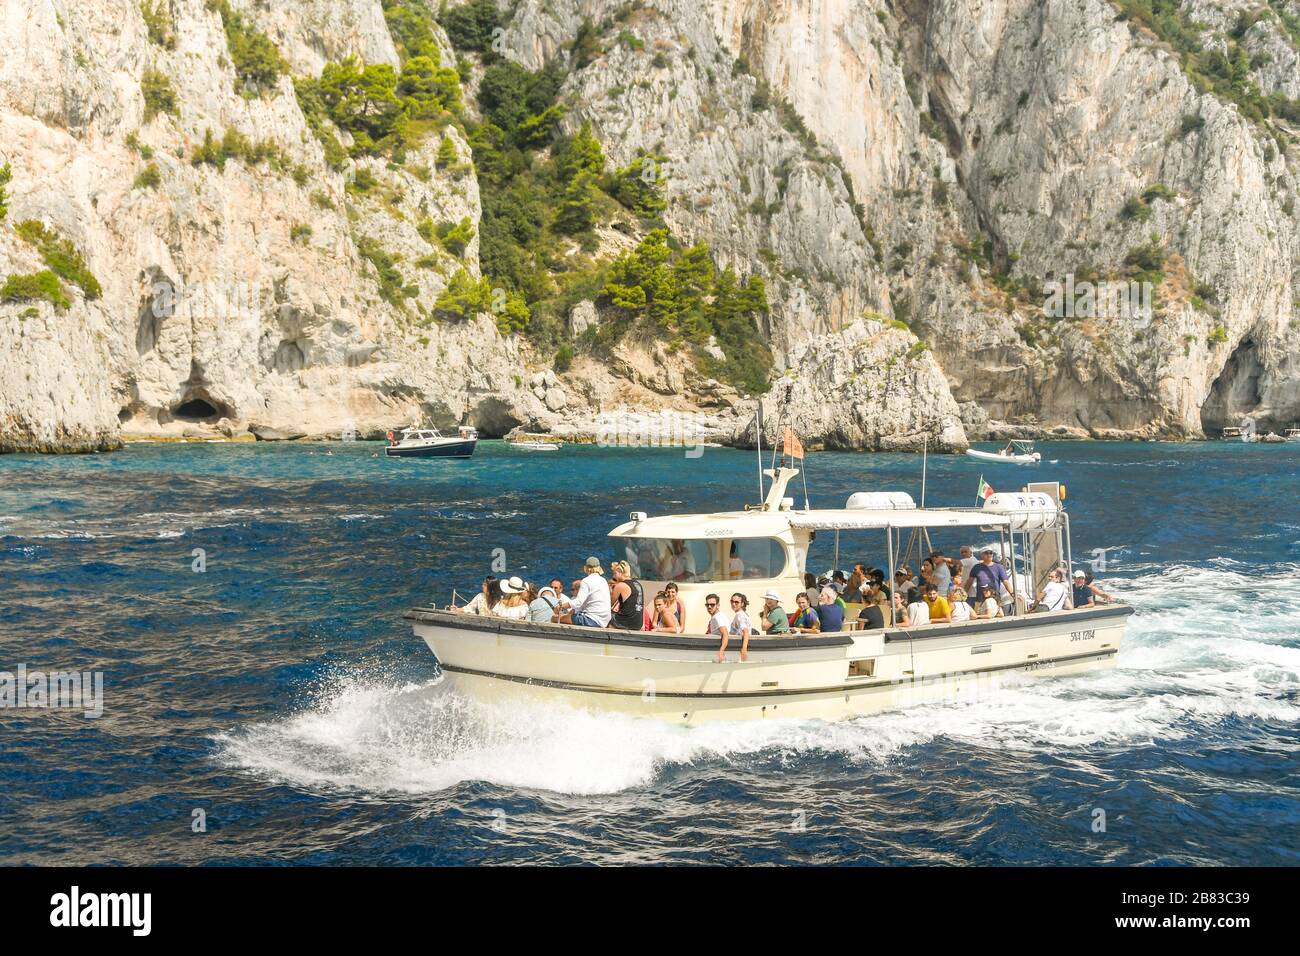 ISLE OF CAPRI, ITALY - AUGUST 2019: Group of people on board a motor boat on a tourist excursion around the Isle of Capri. Stock Photo